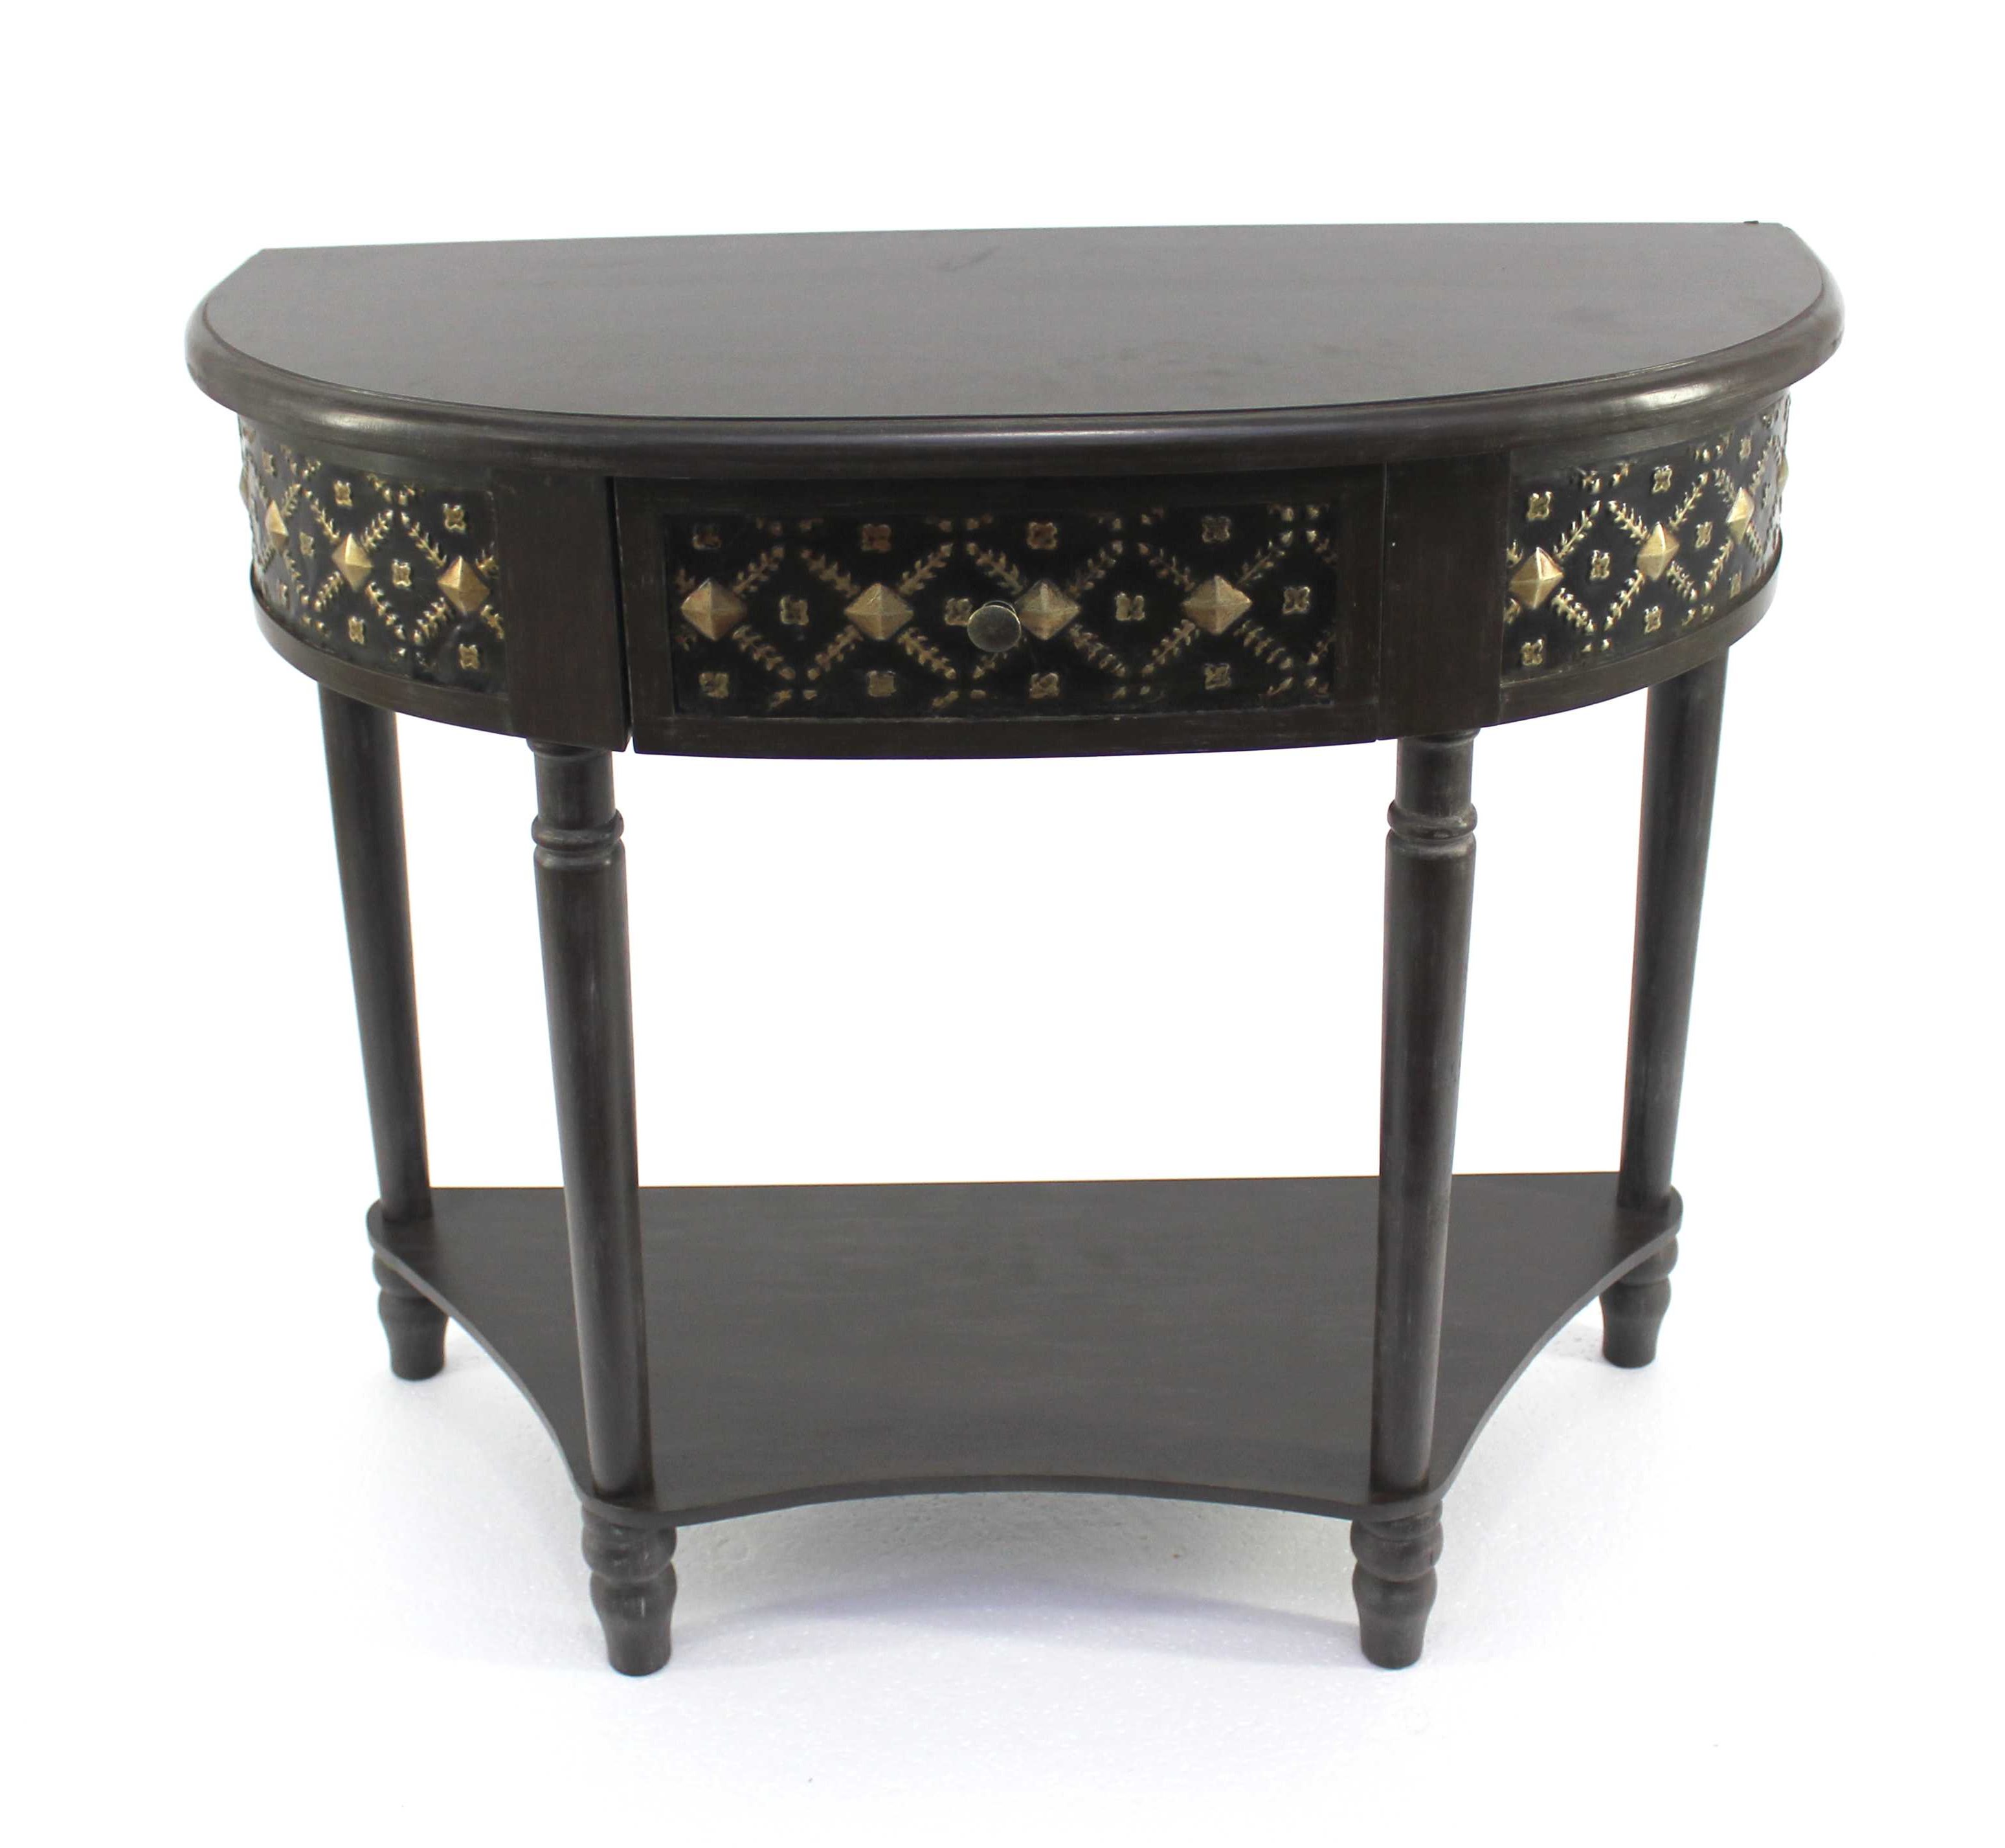 half moon accent table fuentes console small dog kennel end tablecloths and napkins plexiglass furniture tables pedestal wood black metal gallerie clearance media storage butler